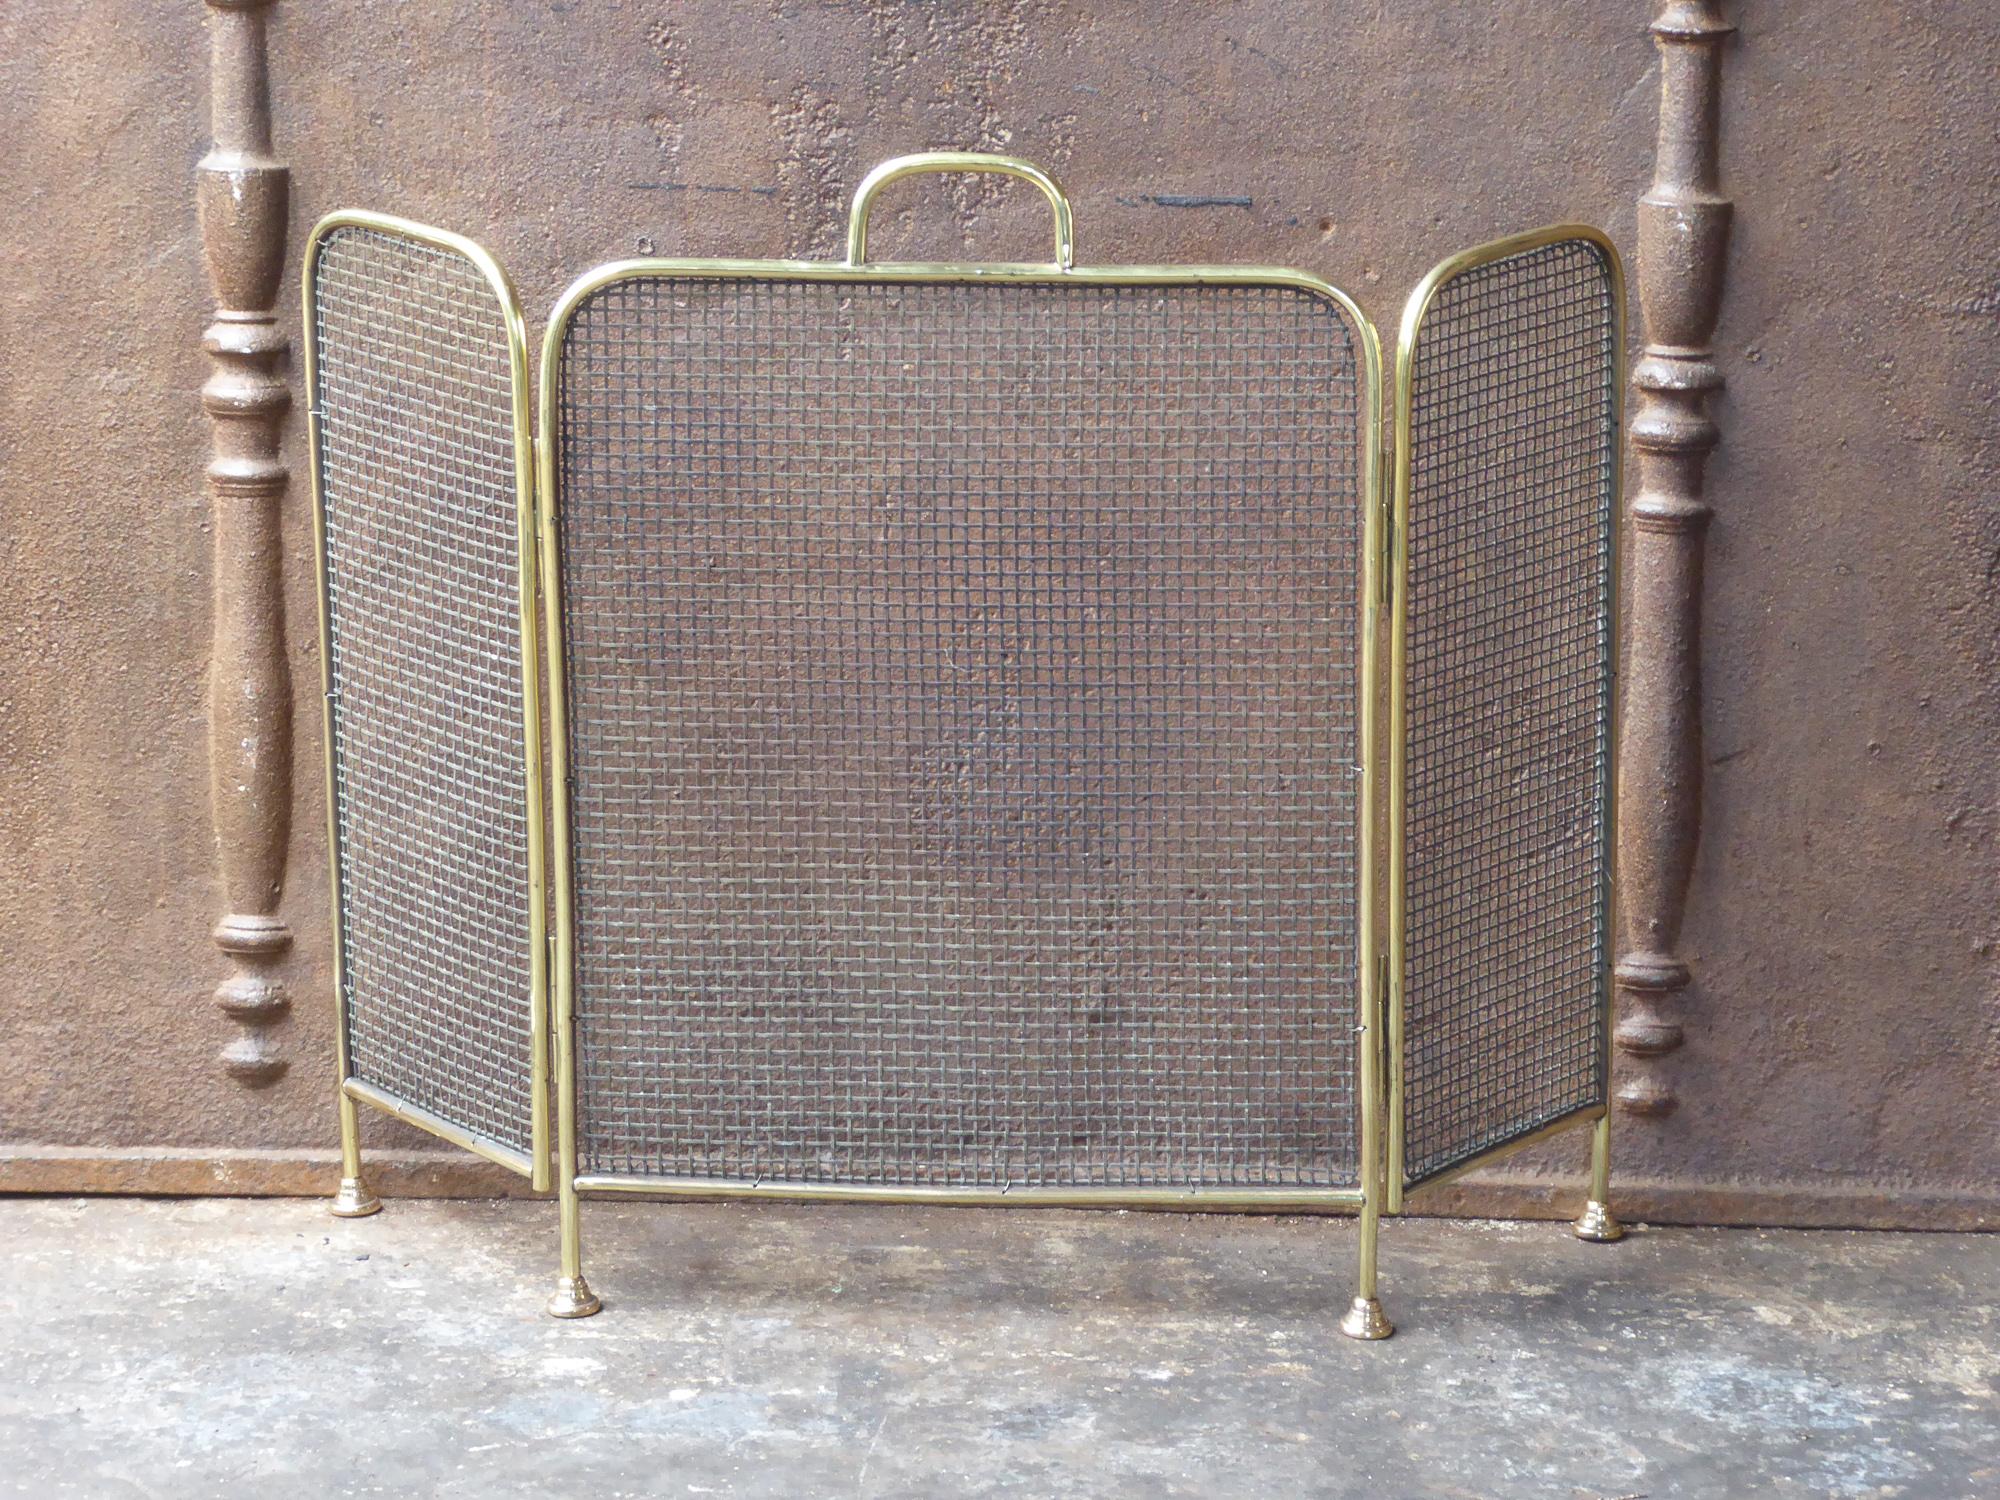 19th century English Victorian fireplace screen made of polished brass and iron mesh.

We have a unique and specialized collection of antique and used fireplace accessories consisting of more than 1000 listings at 1stdibs. Amongst others, we